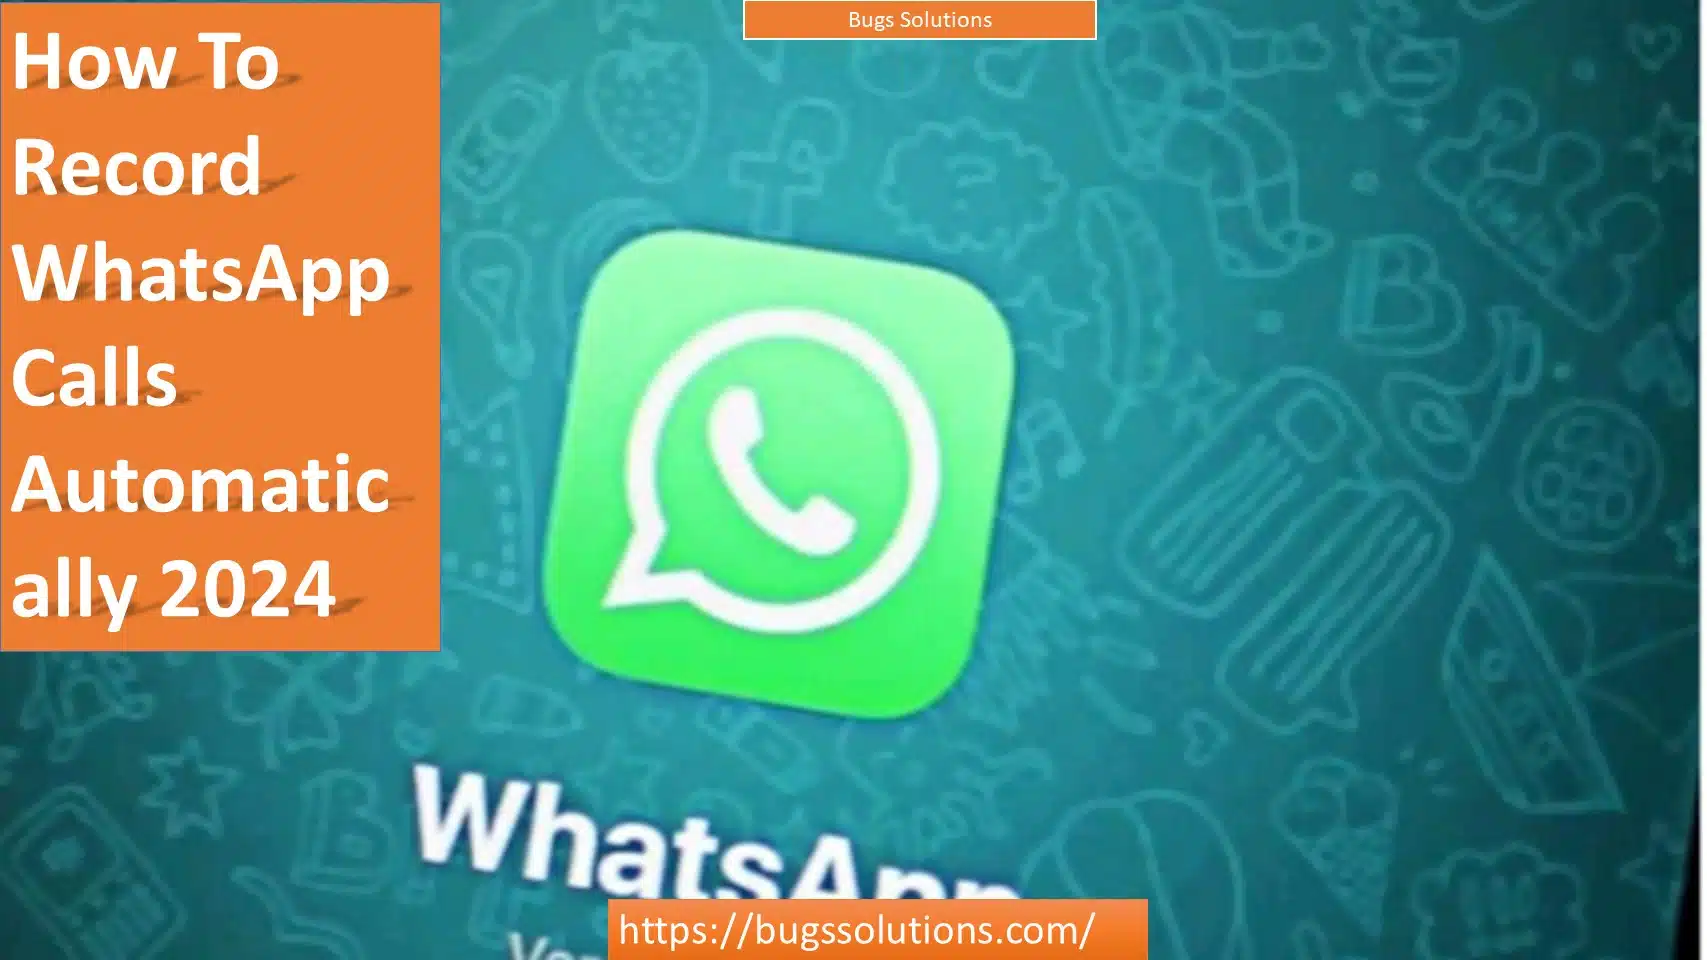 How To Record WhatsApp Calls Automatically 2024